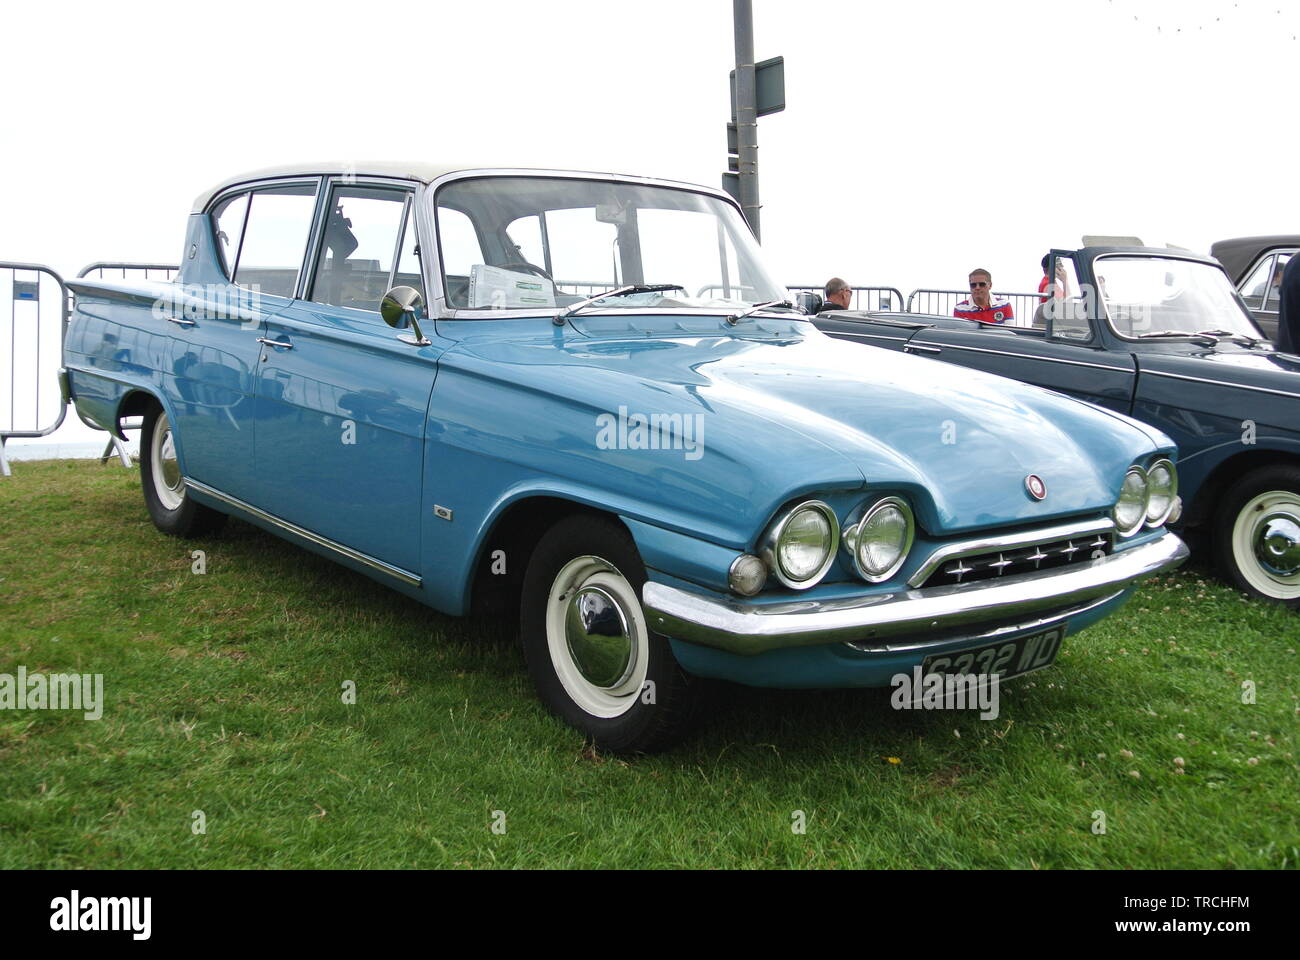 A 1961 Ford Consul Classic car parked up on display at the English Riviera classic car show, Paignton, Devon, England, UK. Stock Photo